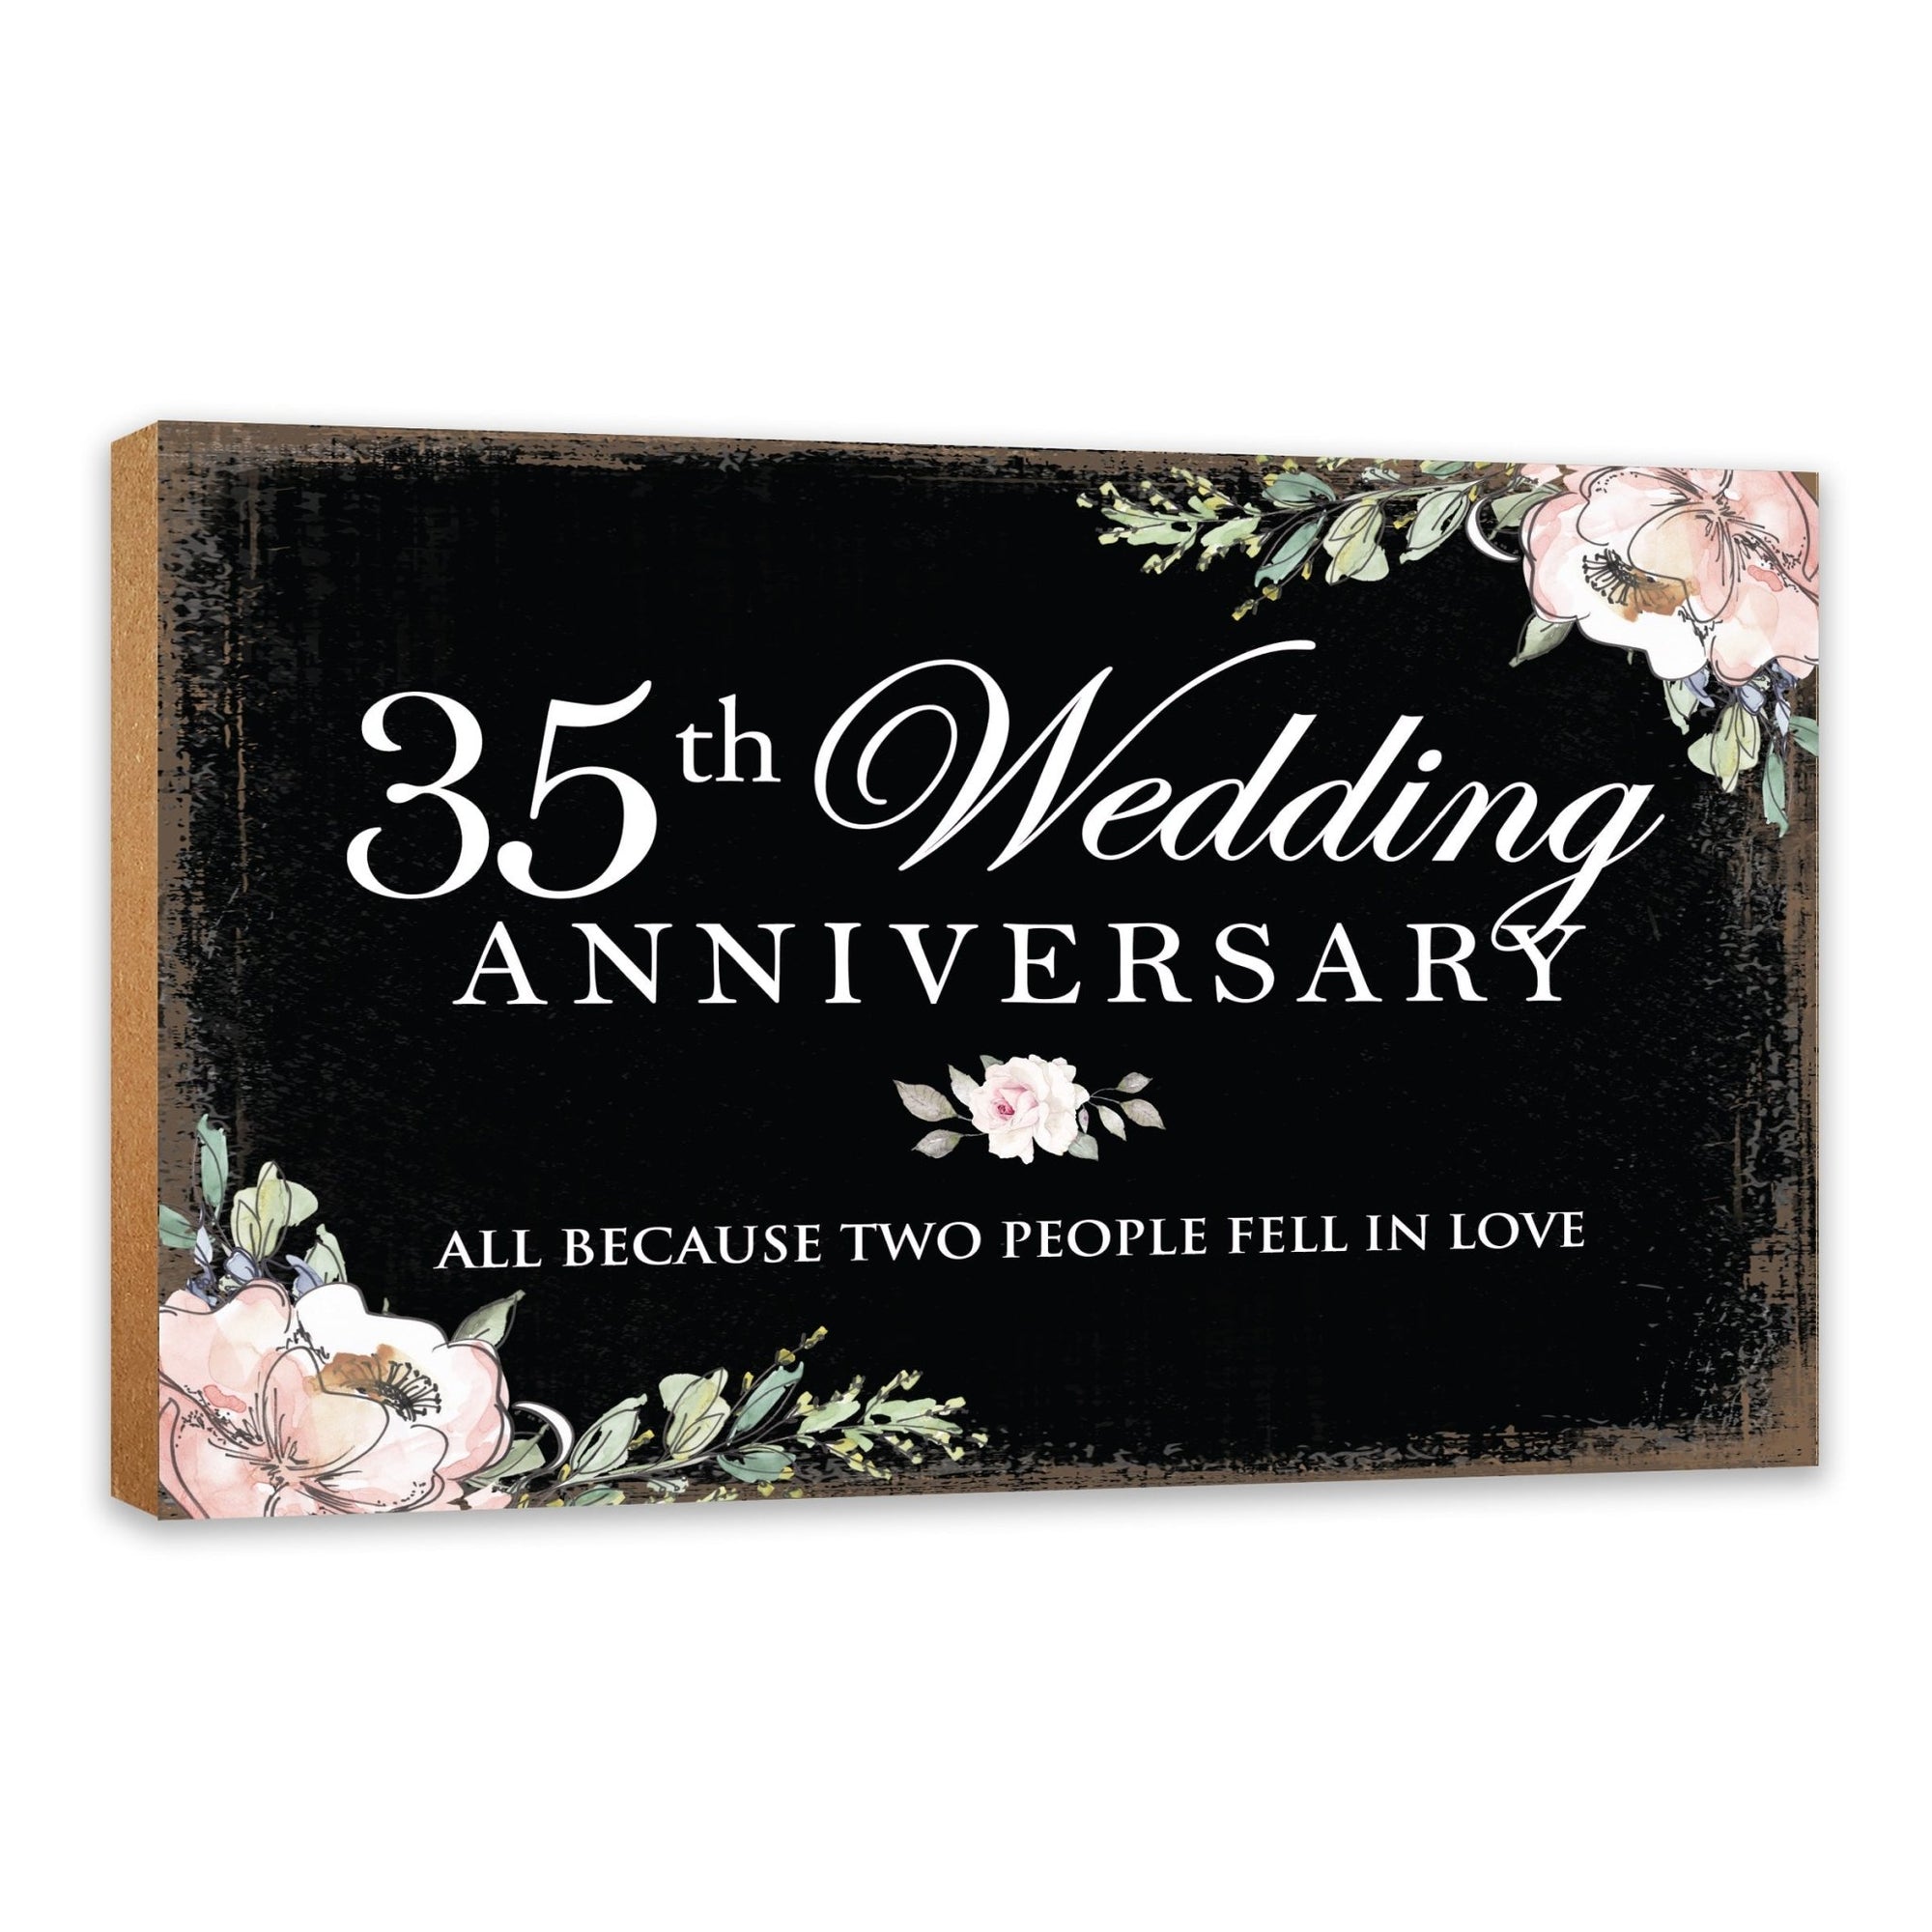 35th Wedding Anniversary Unique Shelf Decor and Tabletop Signs Gift for Couples - Fell in Love - LifeSong Milestones